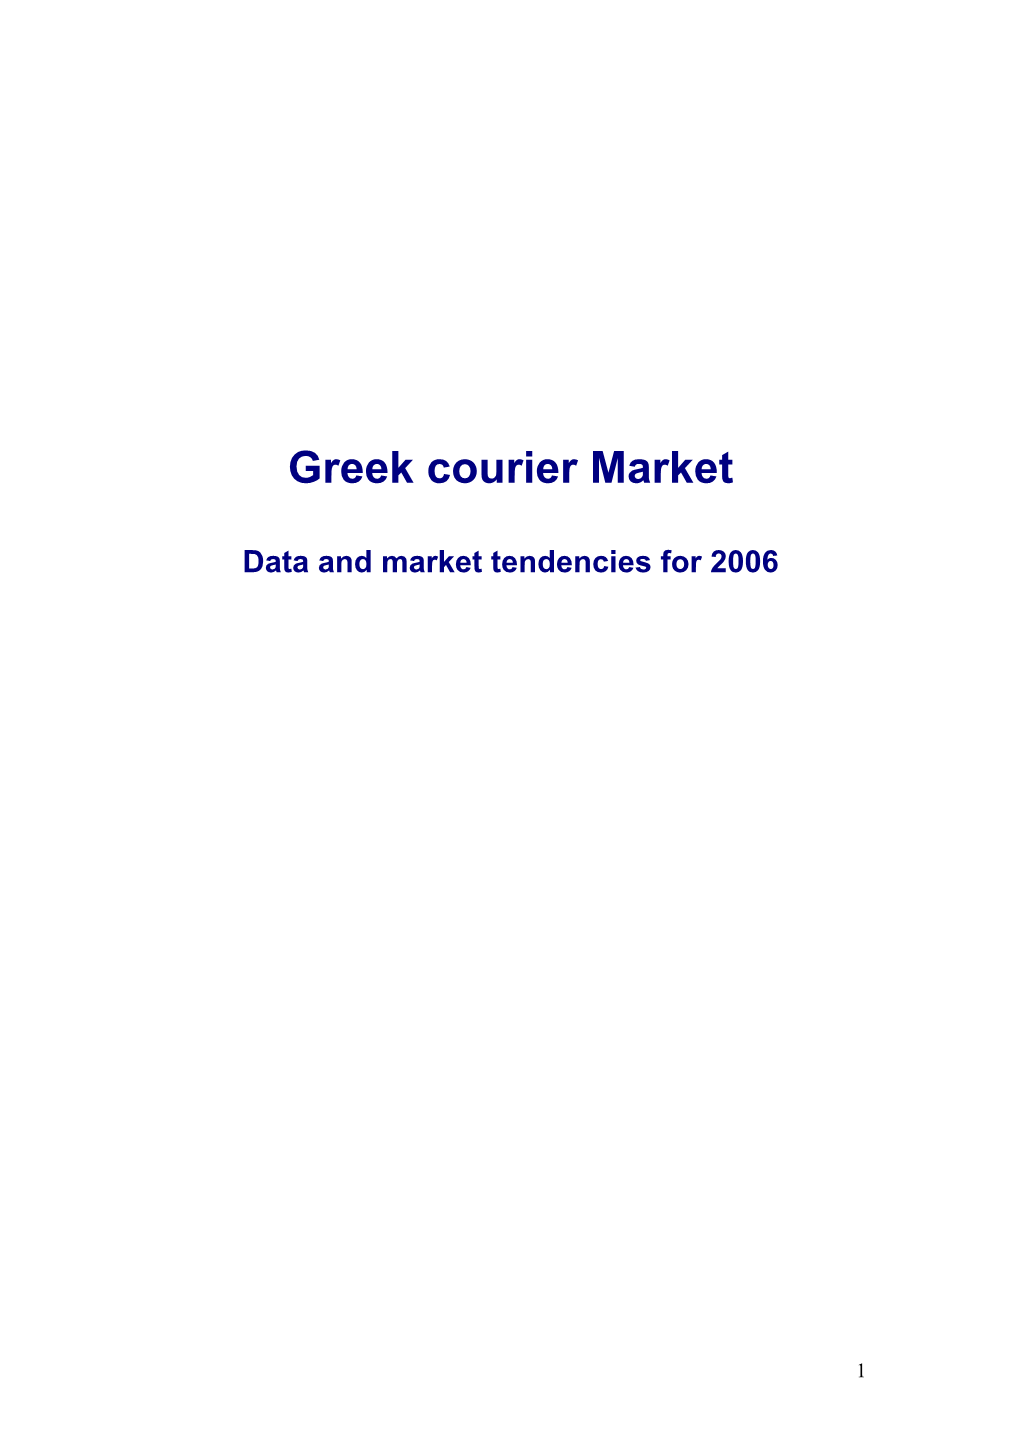 Greek Courier Market Data and Market Tendencies for 2006